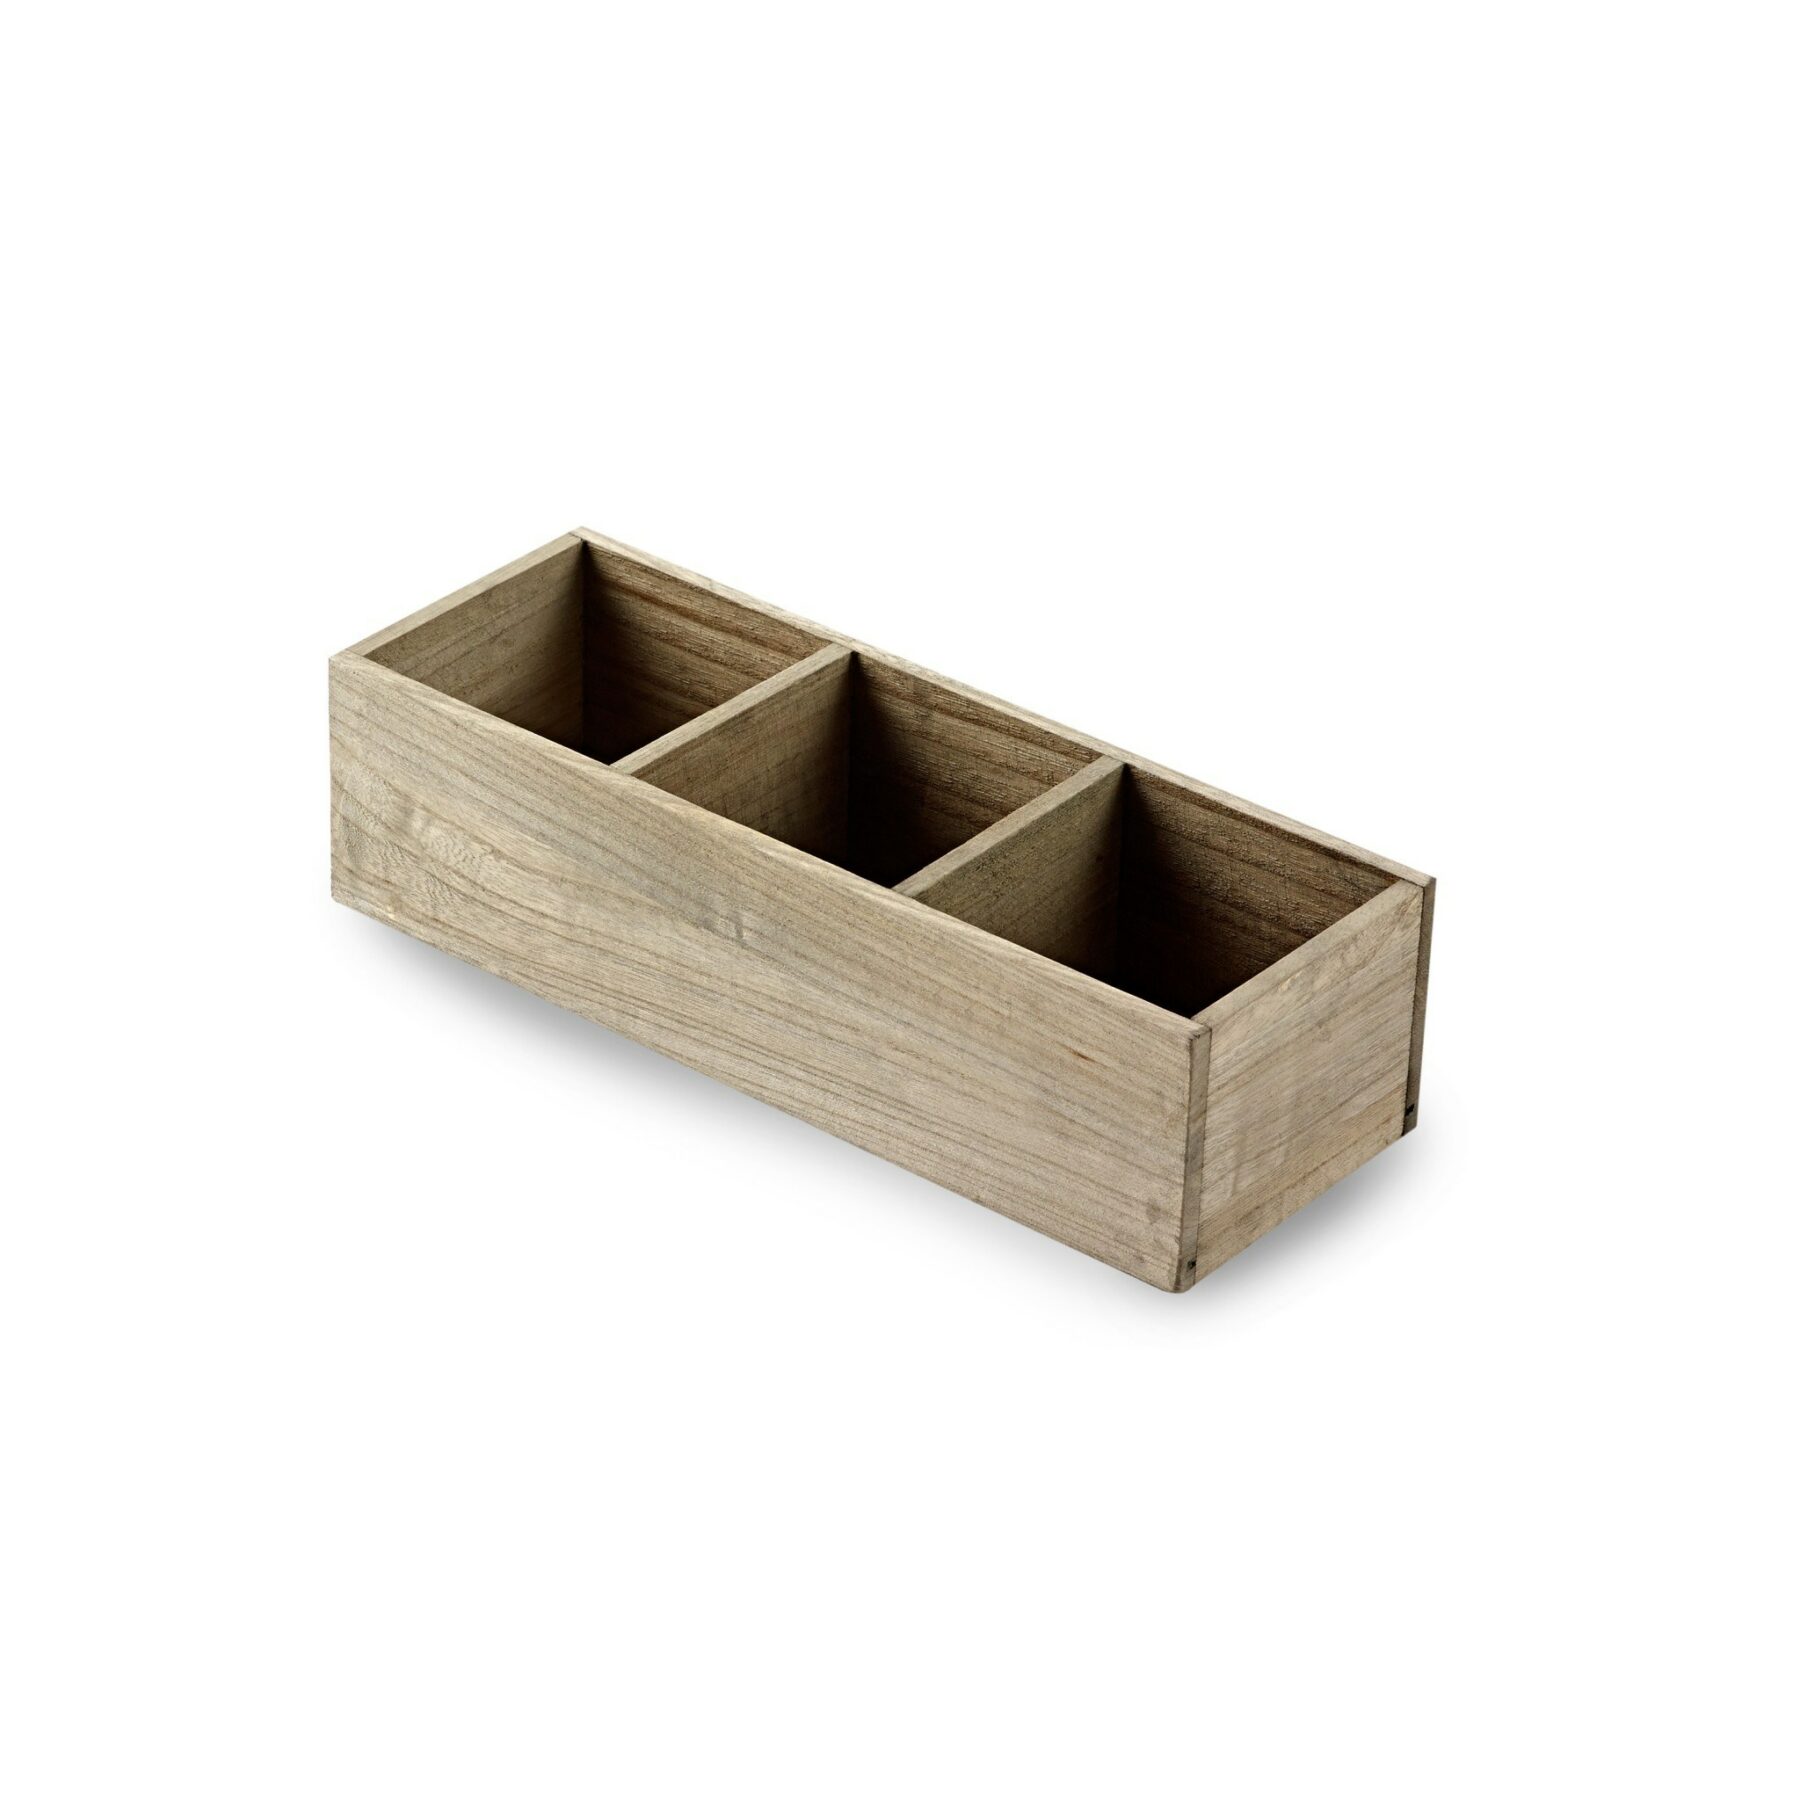 Wooden Box with Dividers